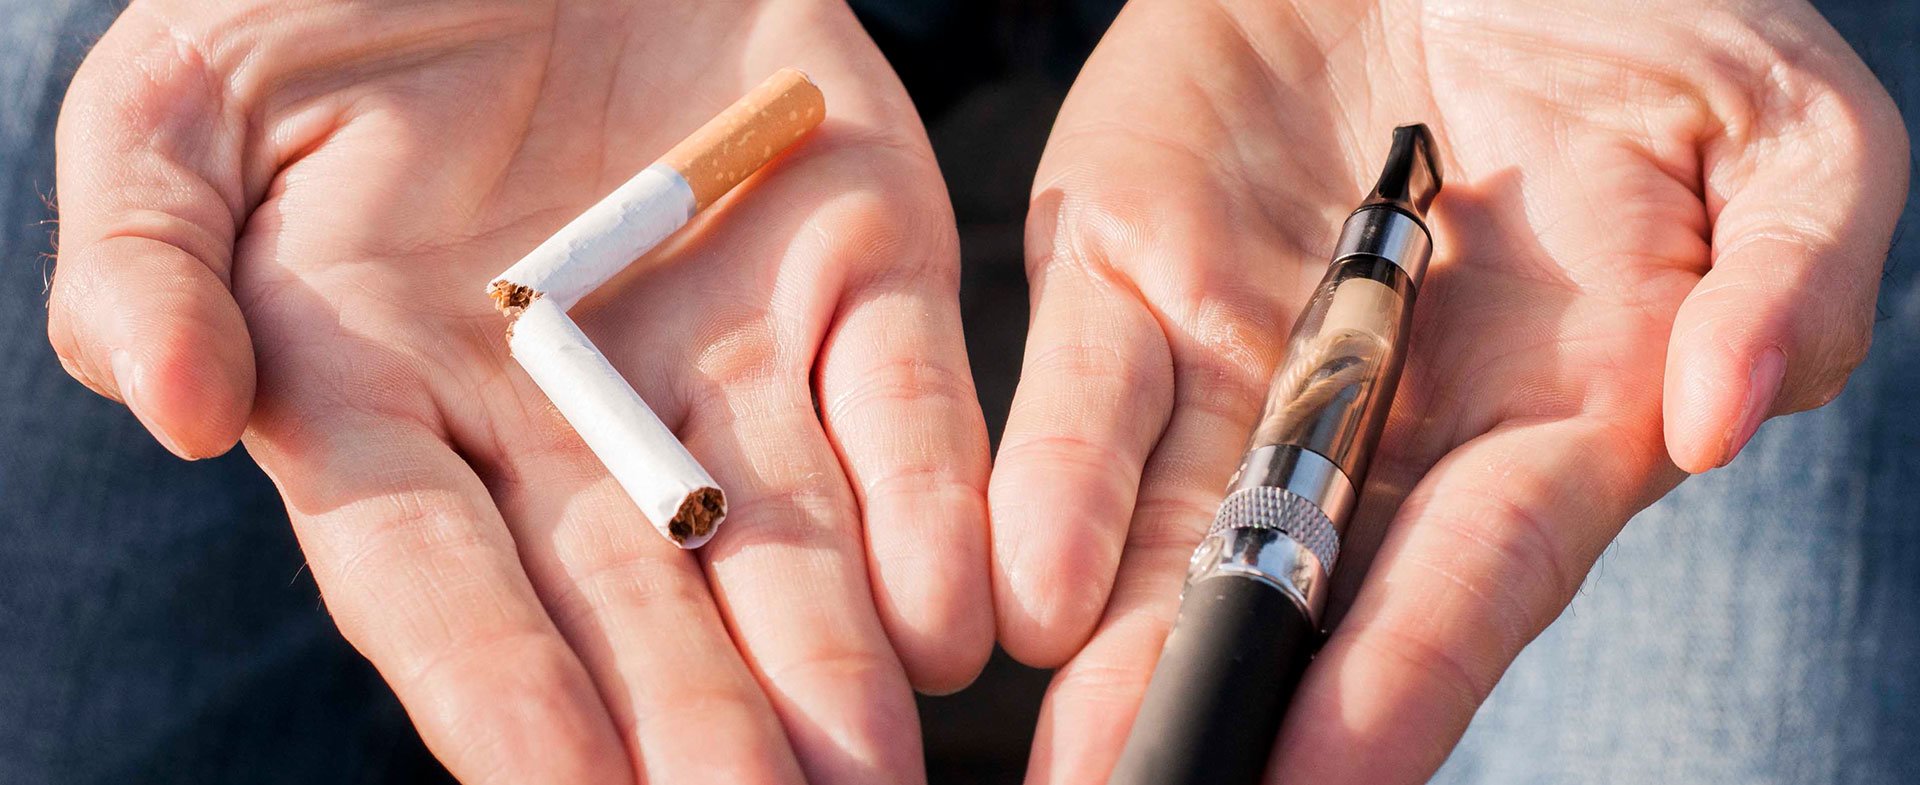 Are Menthol Cigarettes More Harmful Than Regular Ones?